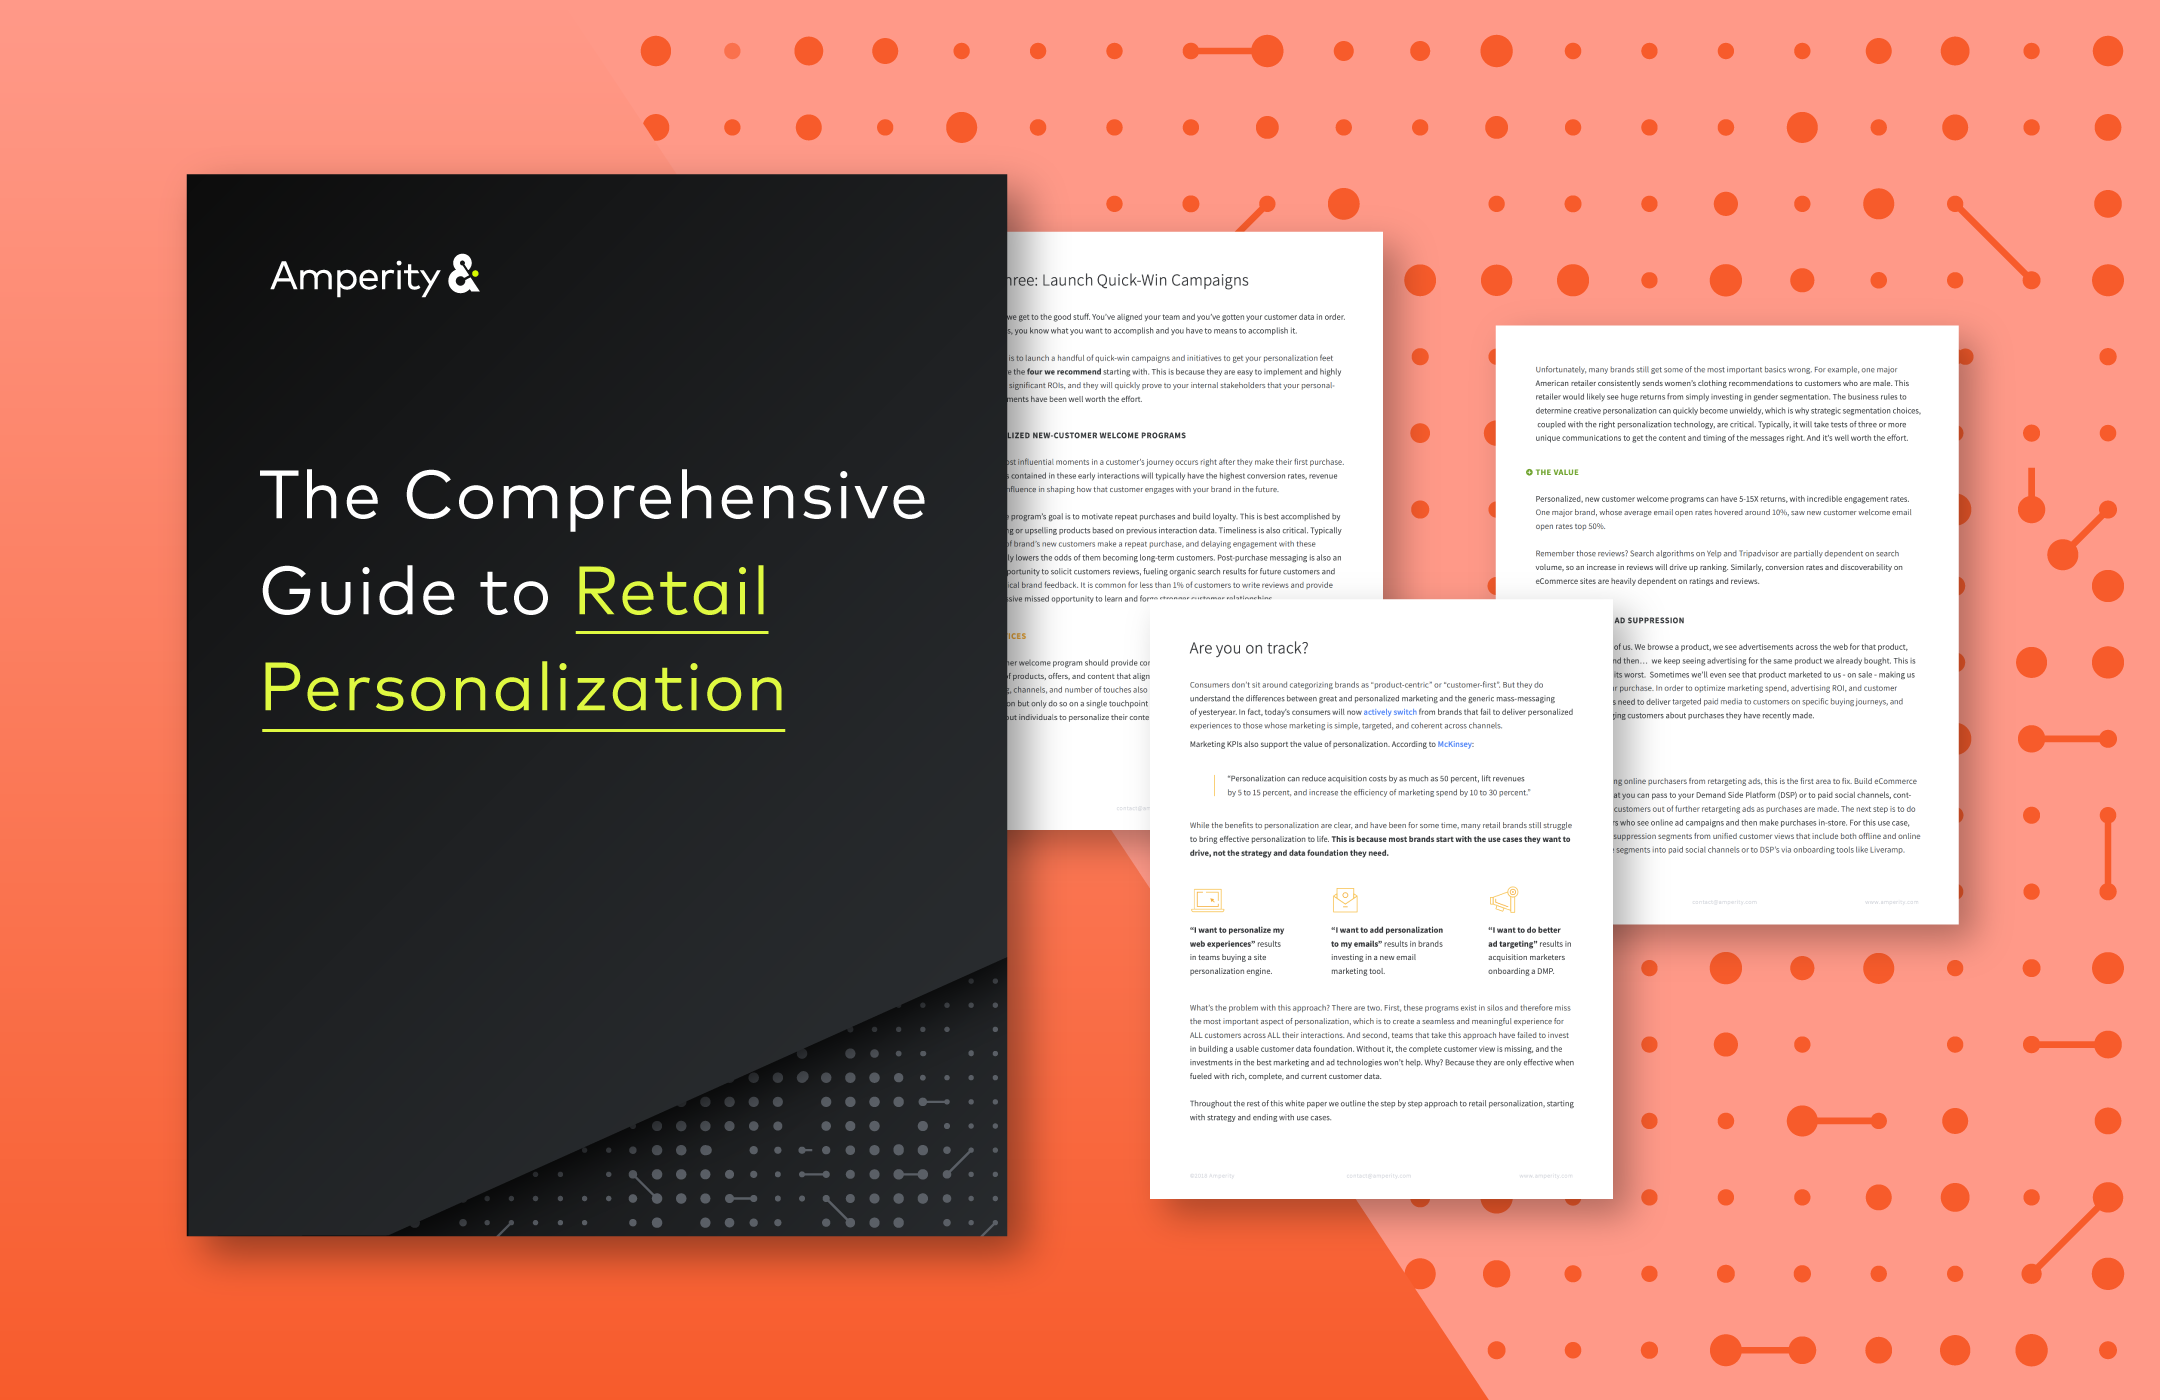 Image displaying: The Comprehensive Guide to Retail Personalization.